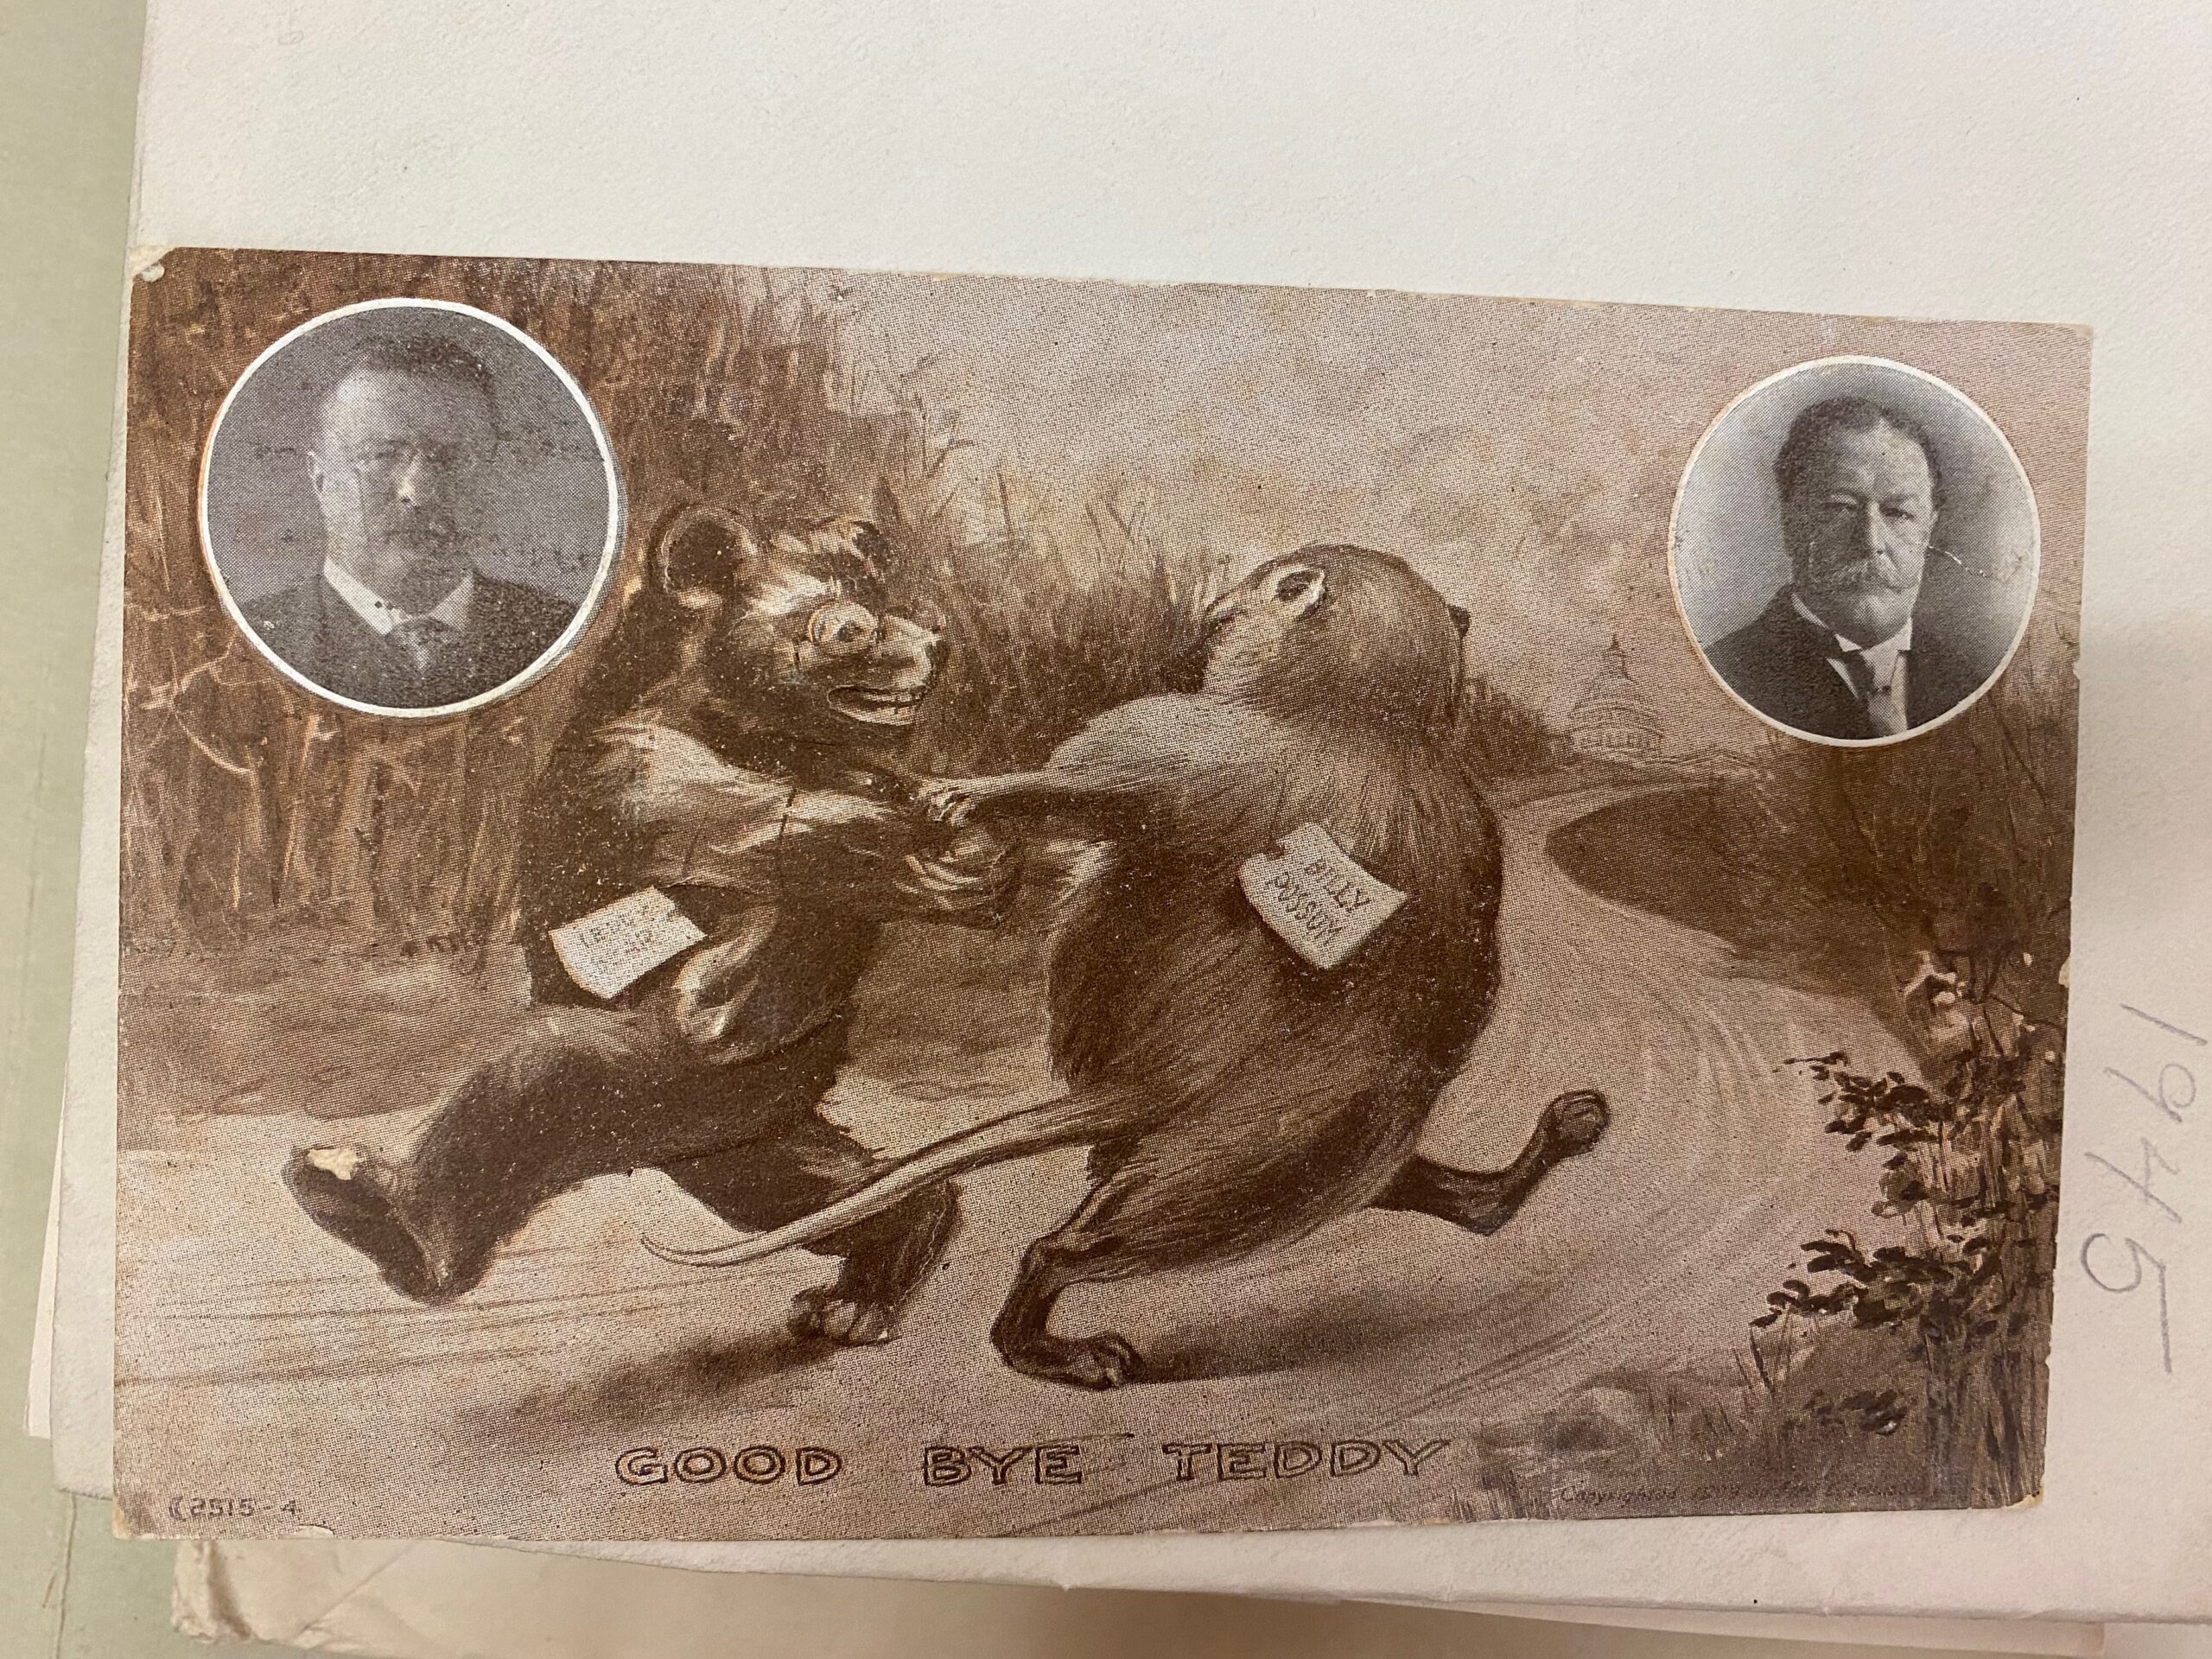 A cartoon bear and possum dance in the center of the image. Floating circles with photos of candidates Teddy and Billy appear in the upper right and left hand corners.